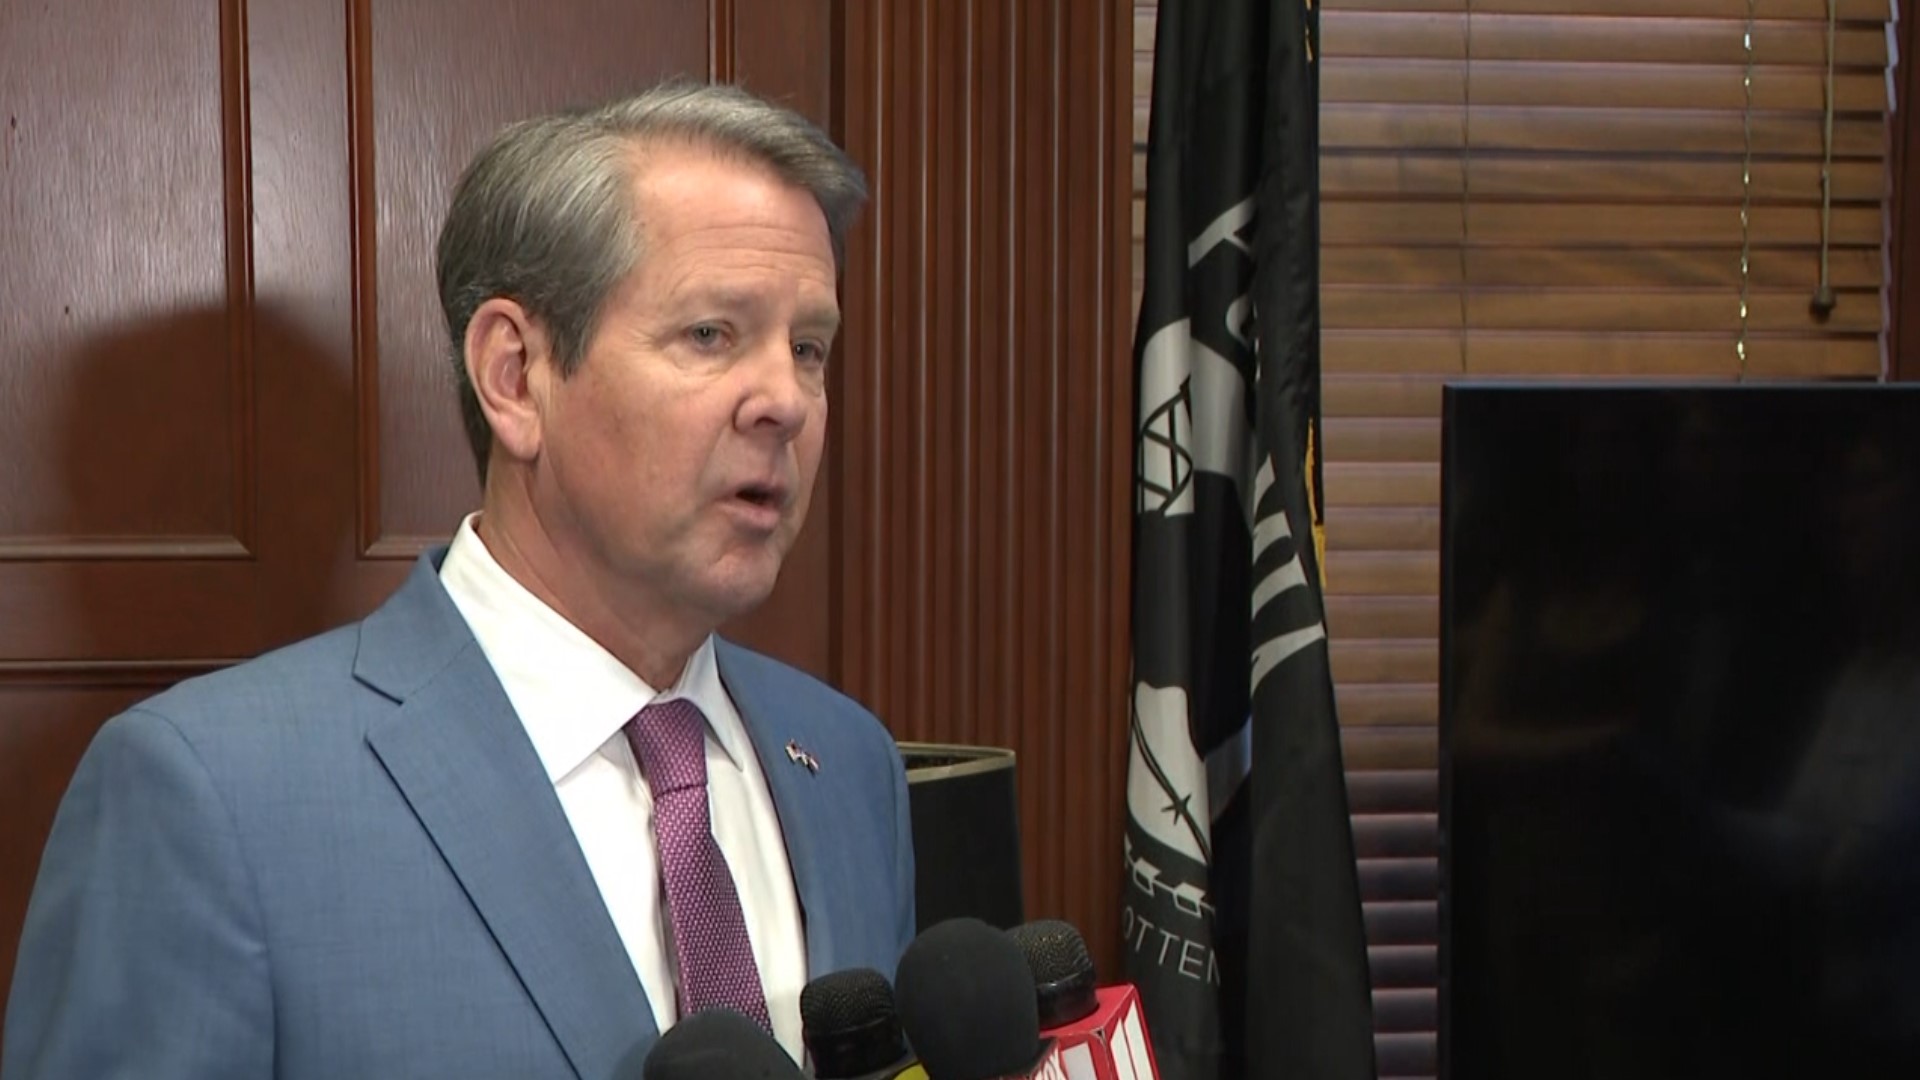 Gov. Brian Kemp spoke about the construction pause of the Rivian plant in Georgia, which could last until 2030.